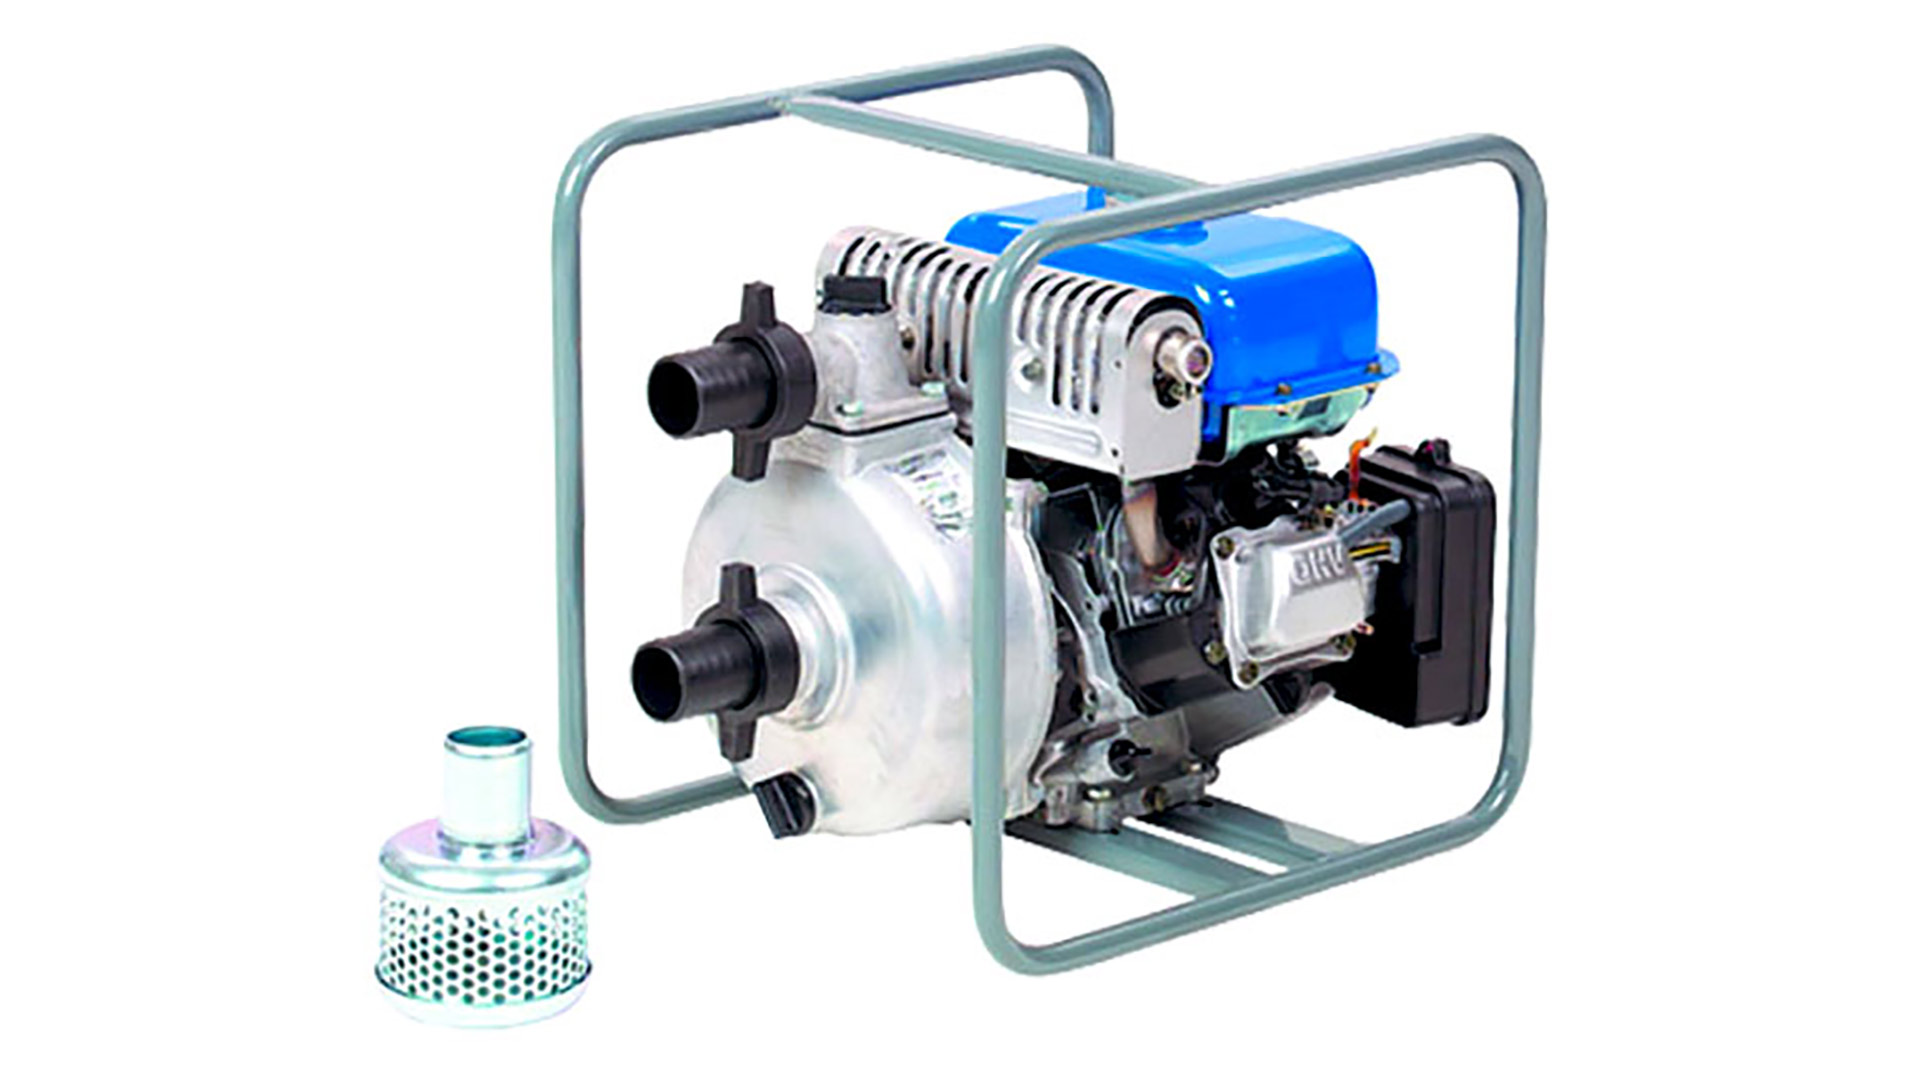 YAMAHA EP50H PUMP - DEFINED RELIABILITY:
Powered by Yamaha’s MZ175 5.5hp, 4-stroke engine with recoil starter. This 2-inch inlet and on-way outlet, 3.3 bar pressure pump is suitable for general purpose and water transfer. 